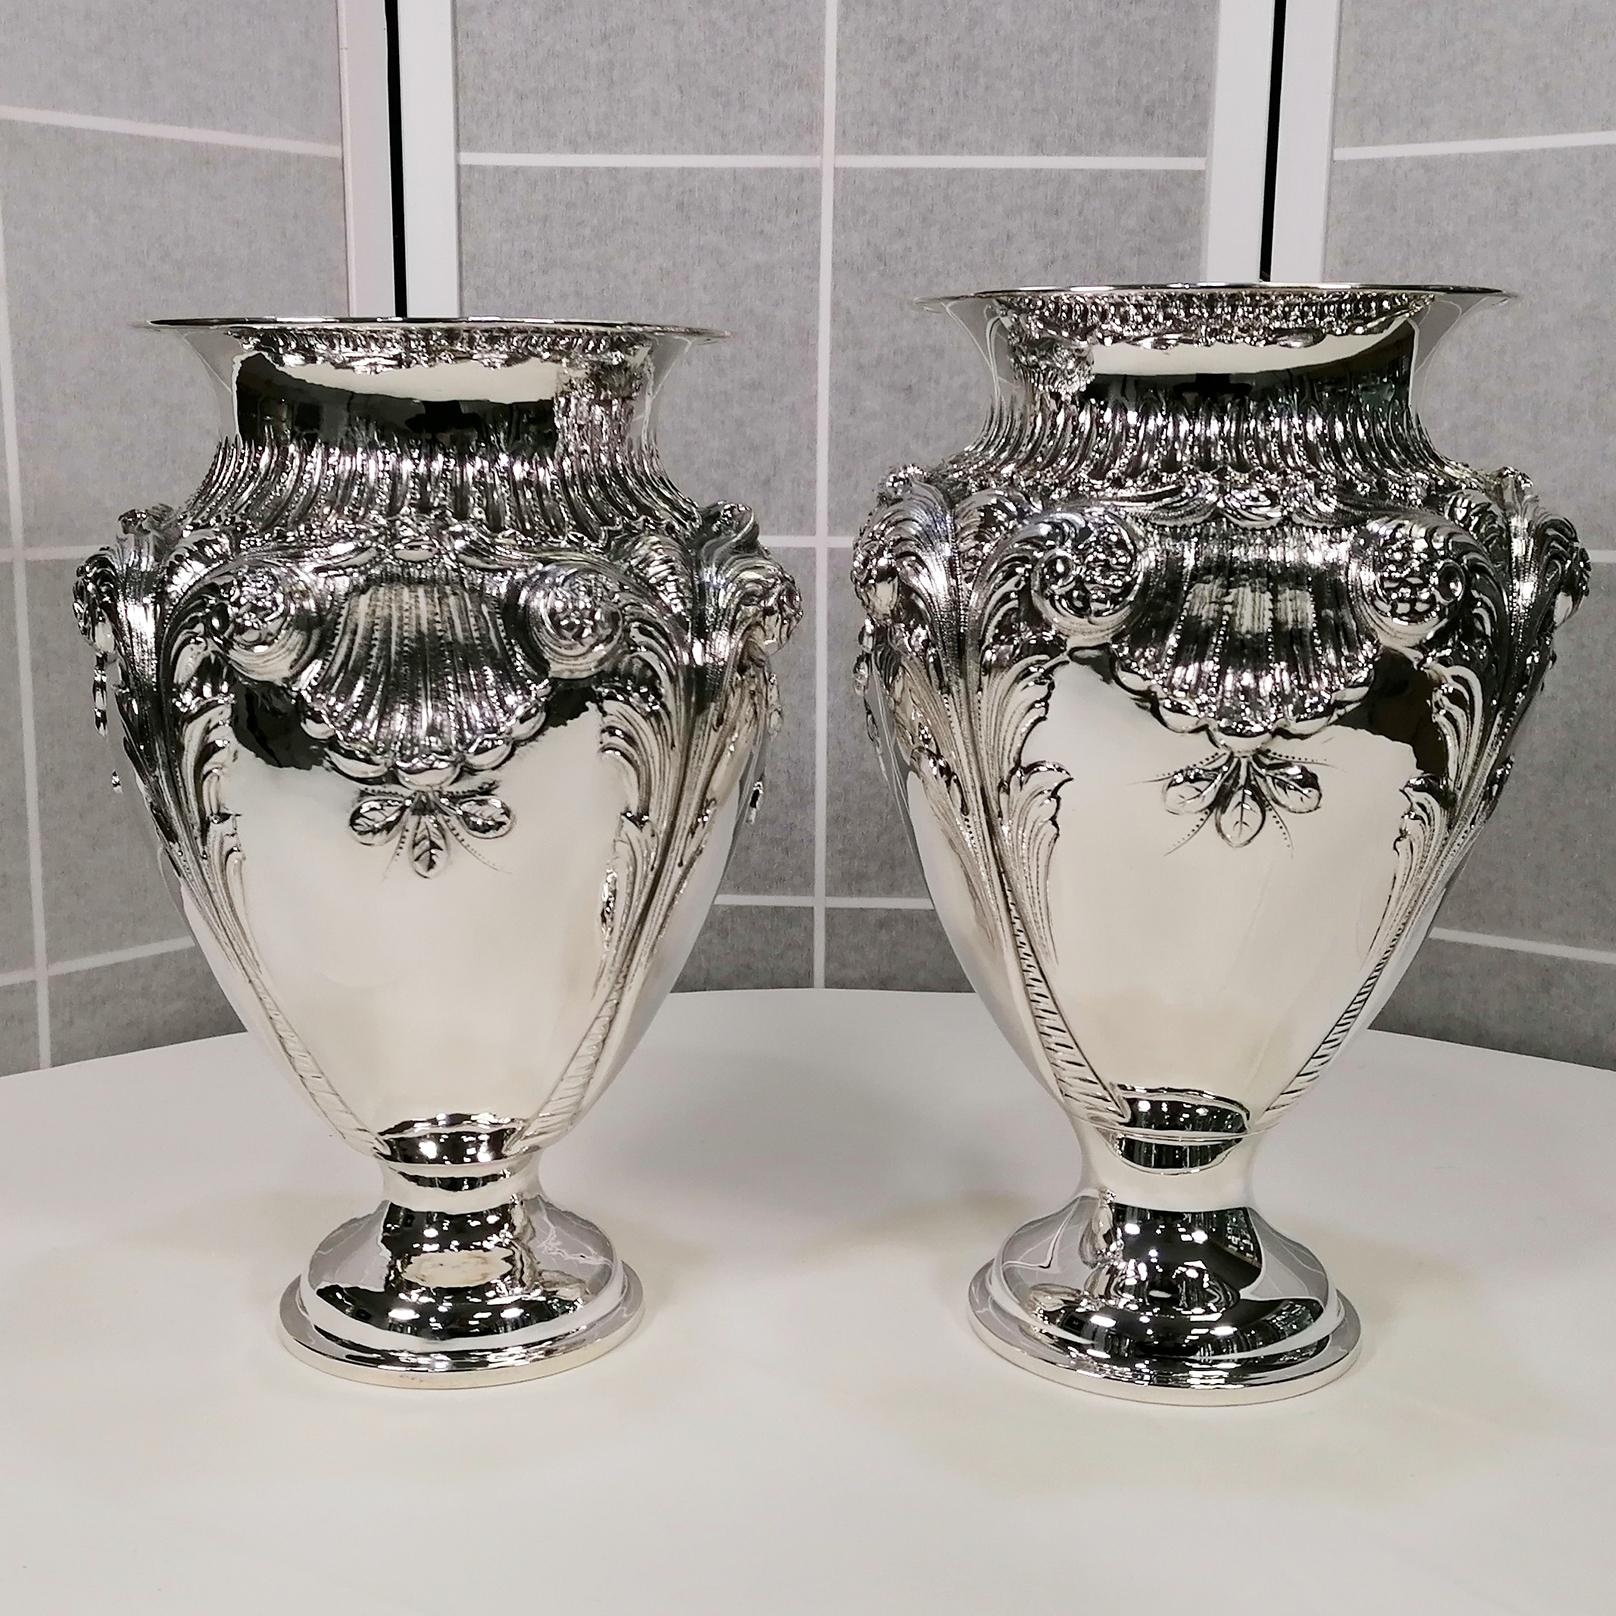 Large baroque style sterling silver vases.
This pair of vases was made by the same master silversmith.
Being made entirely by hand, the vases are similar but not identical, both in size and in the chisel and embossed workmanship.
Suitable for being